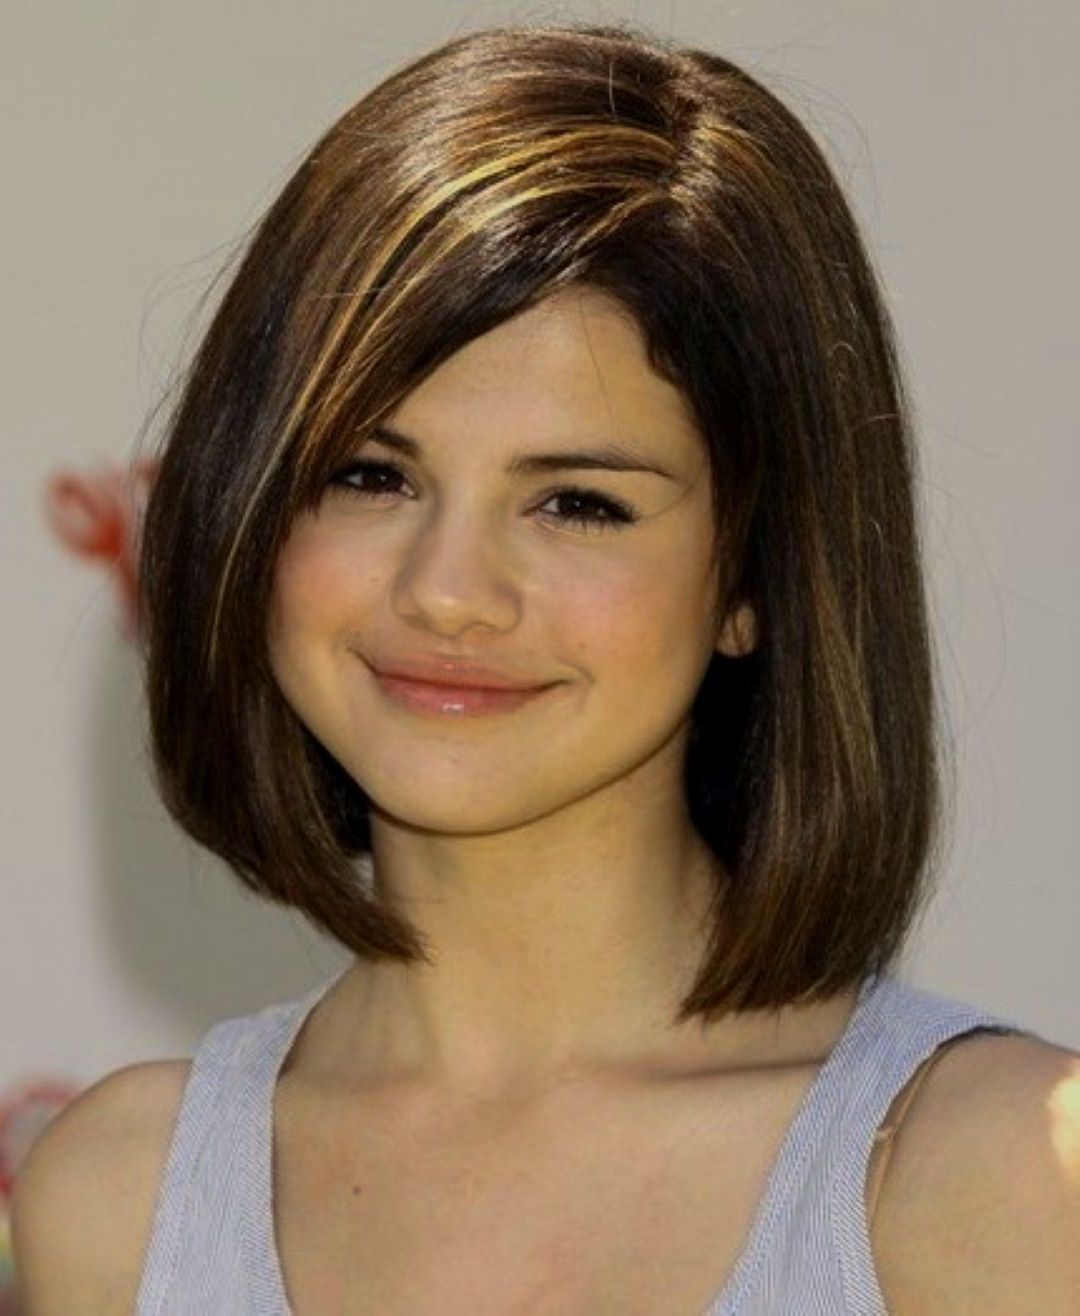 Image Result For Short Hairstyles For Tween Girls | Girl Hairstyles Intended For Short Hairstyles For Young Girls (View 11 of 25)